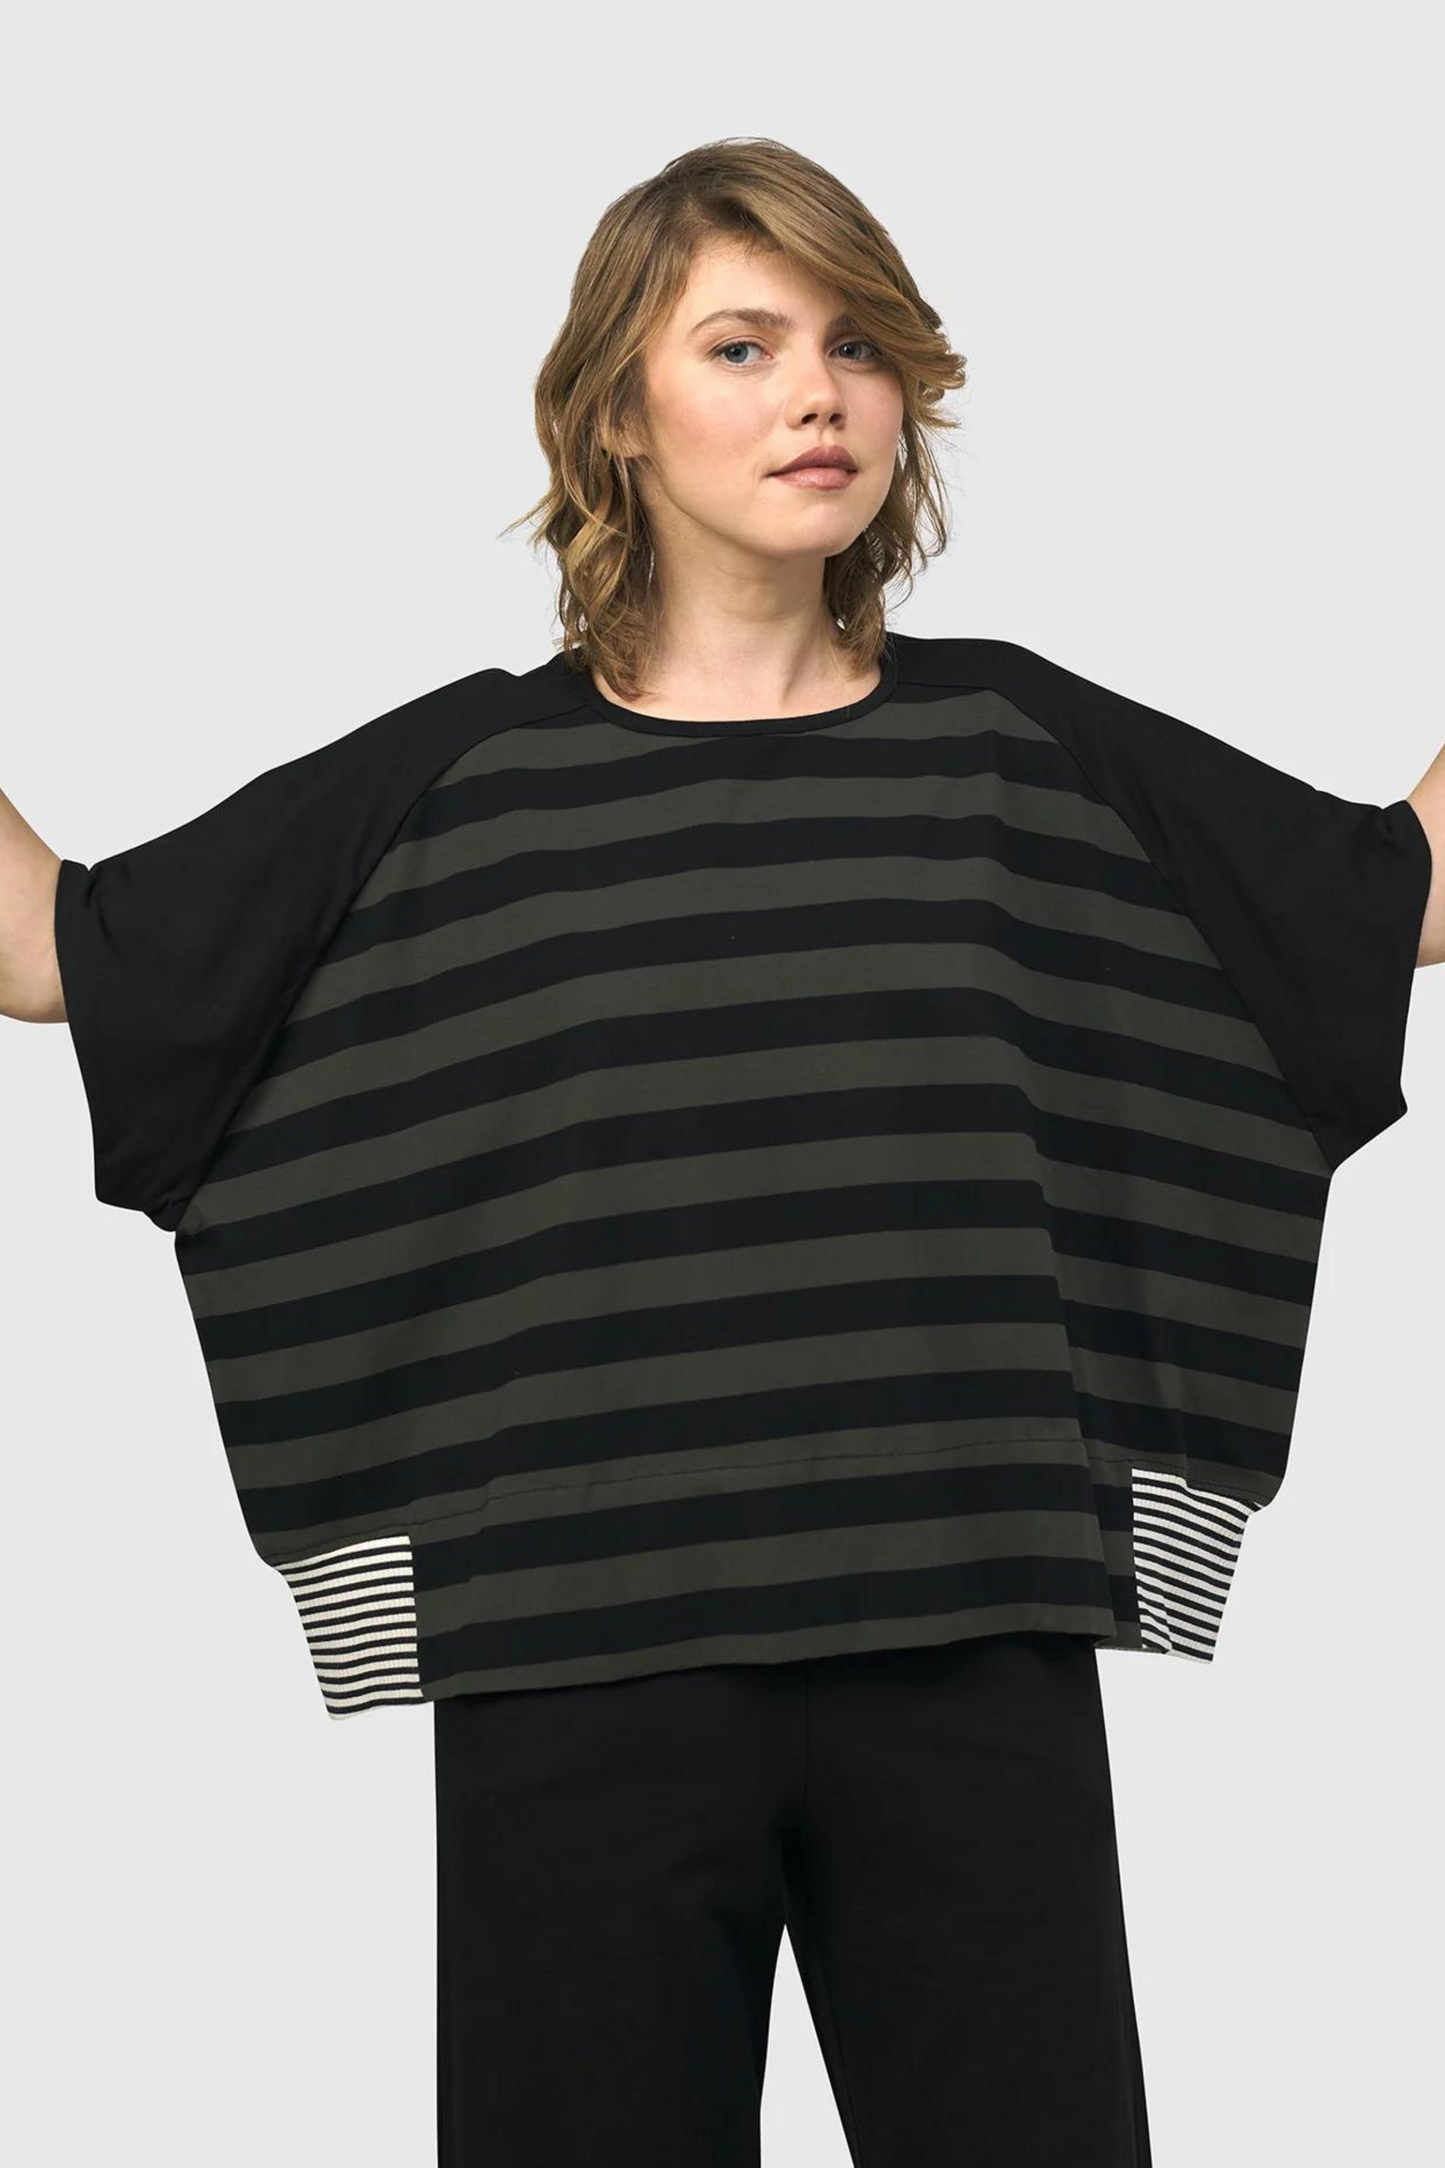 Urban - Green & Black Stripe Top with Fabric Contrasts